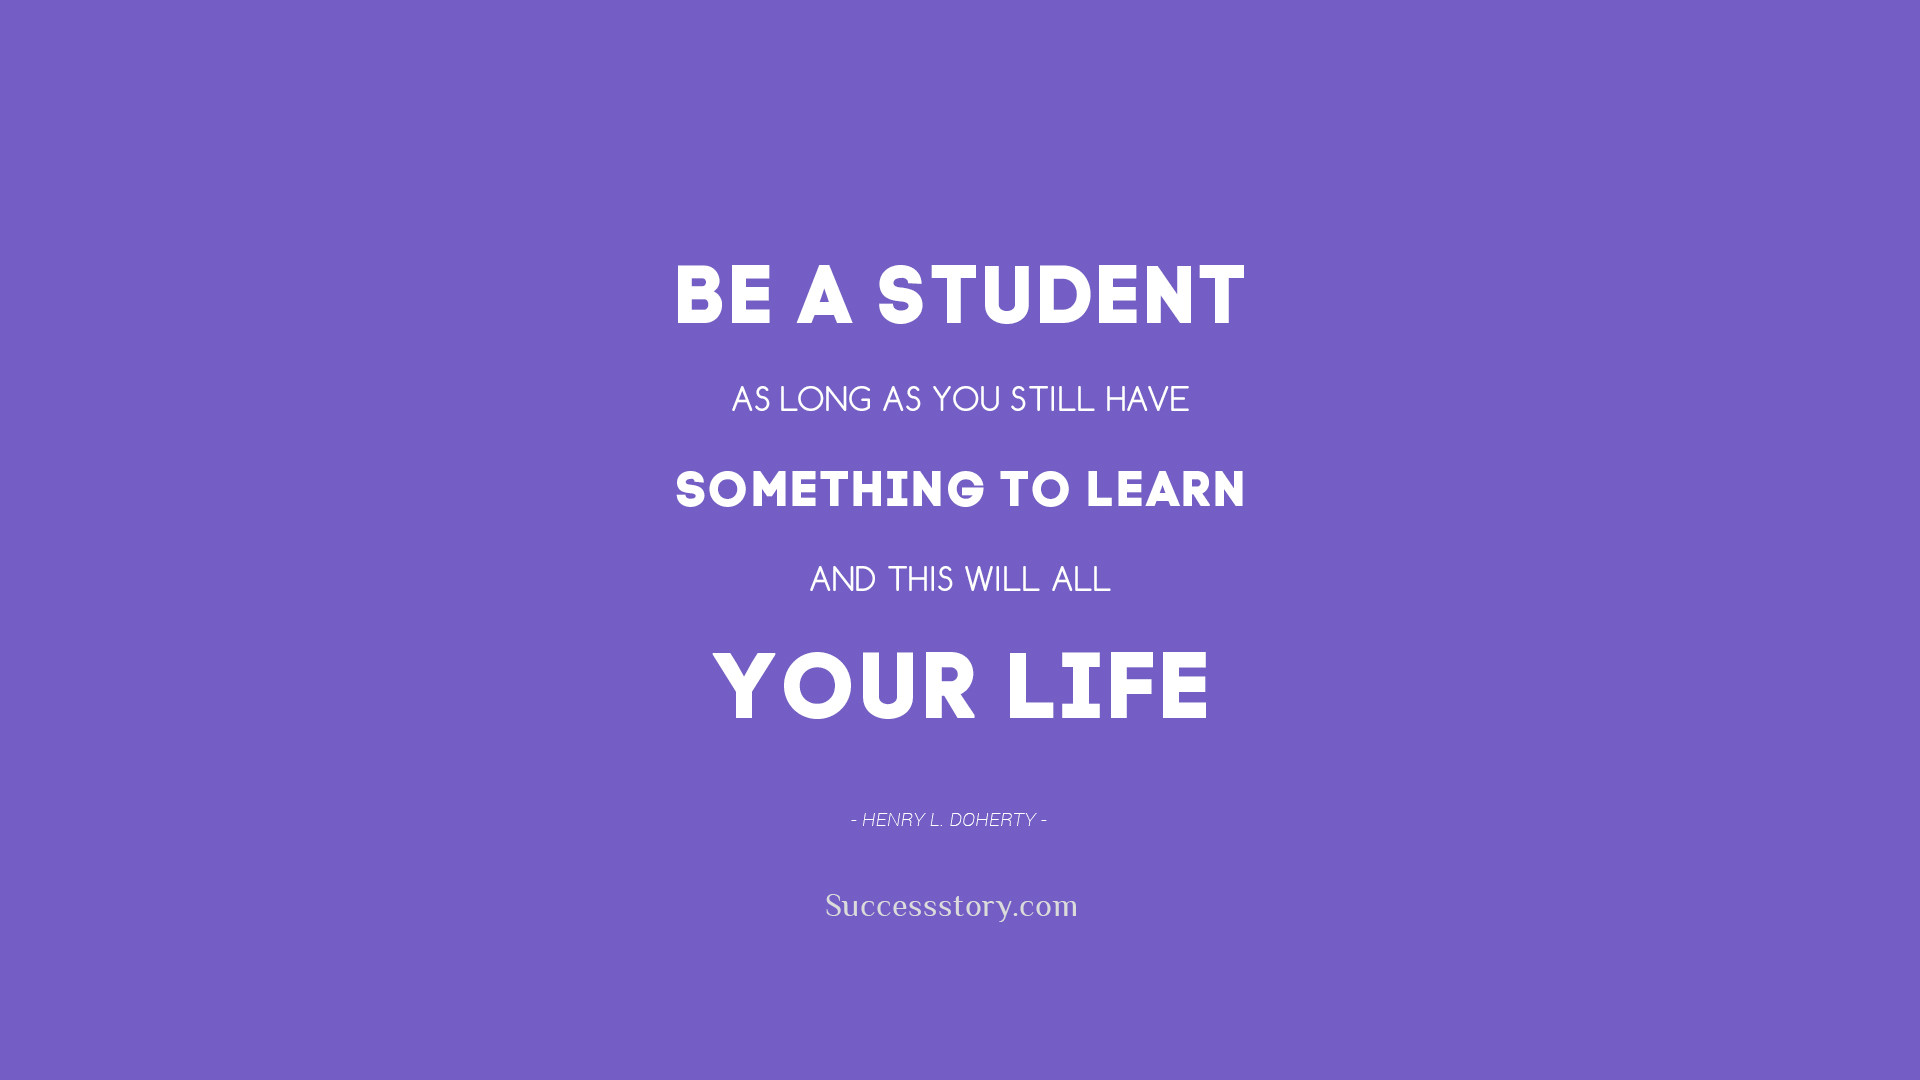 Student Inspirational Quotes
 Inspirational Quotes For Student Success QuotesGram